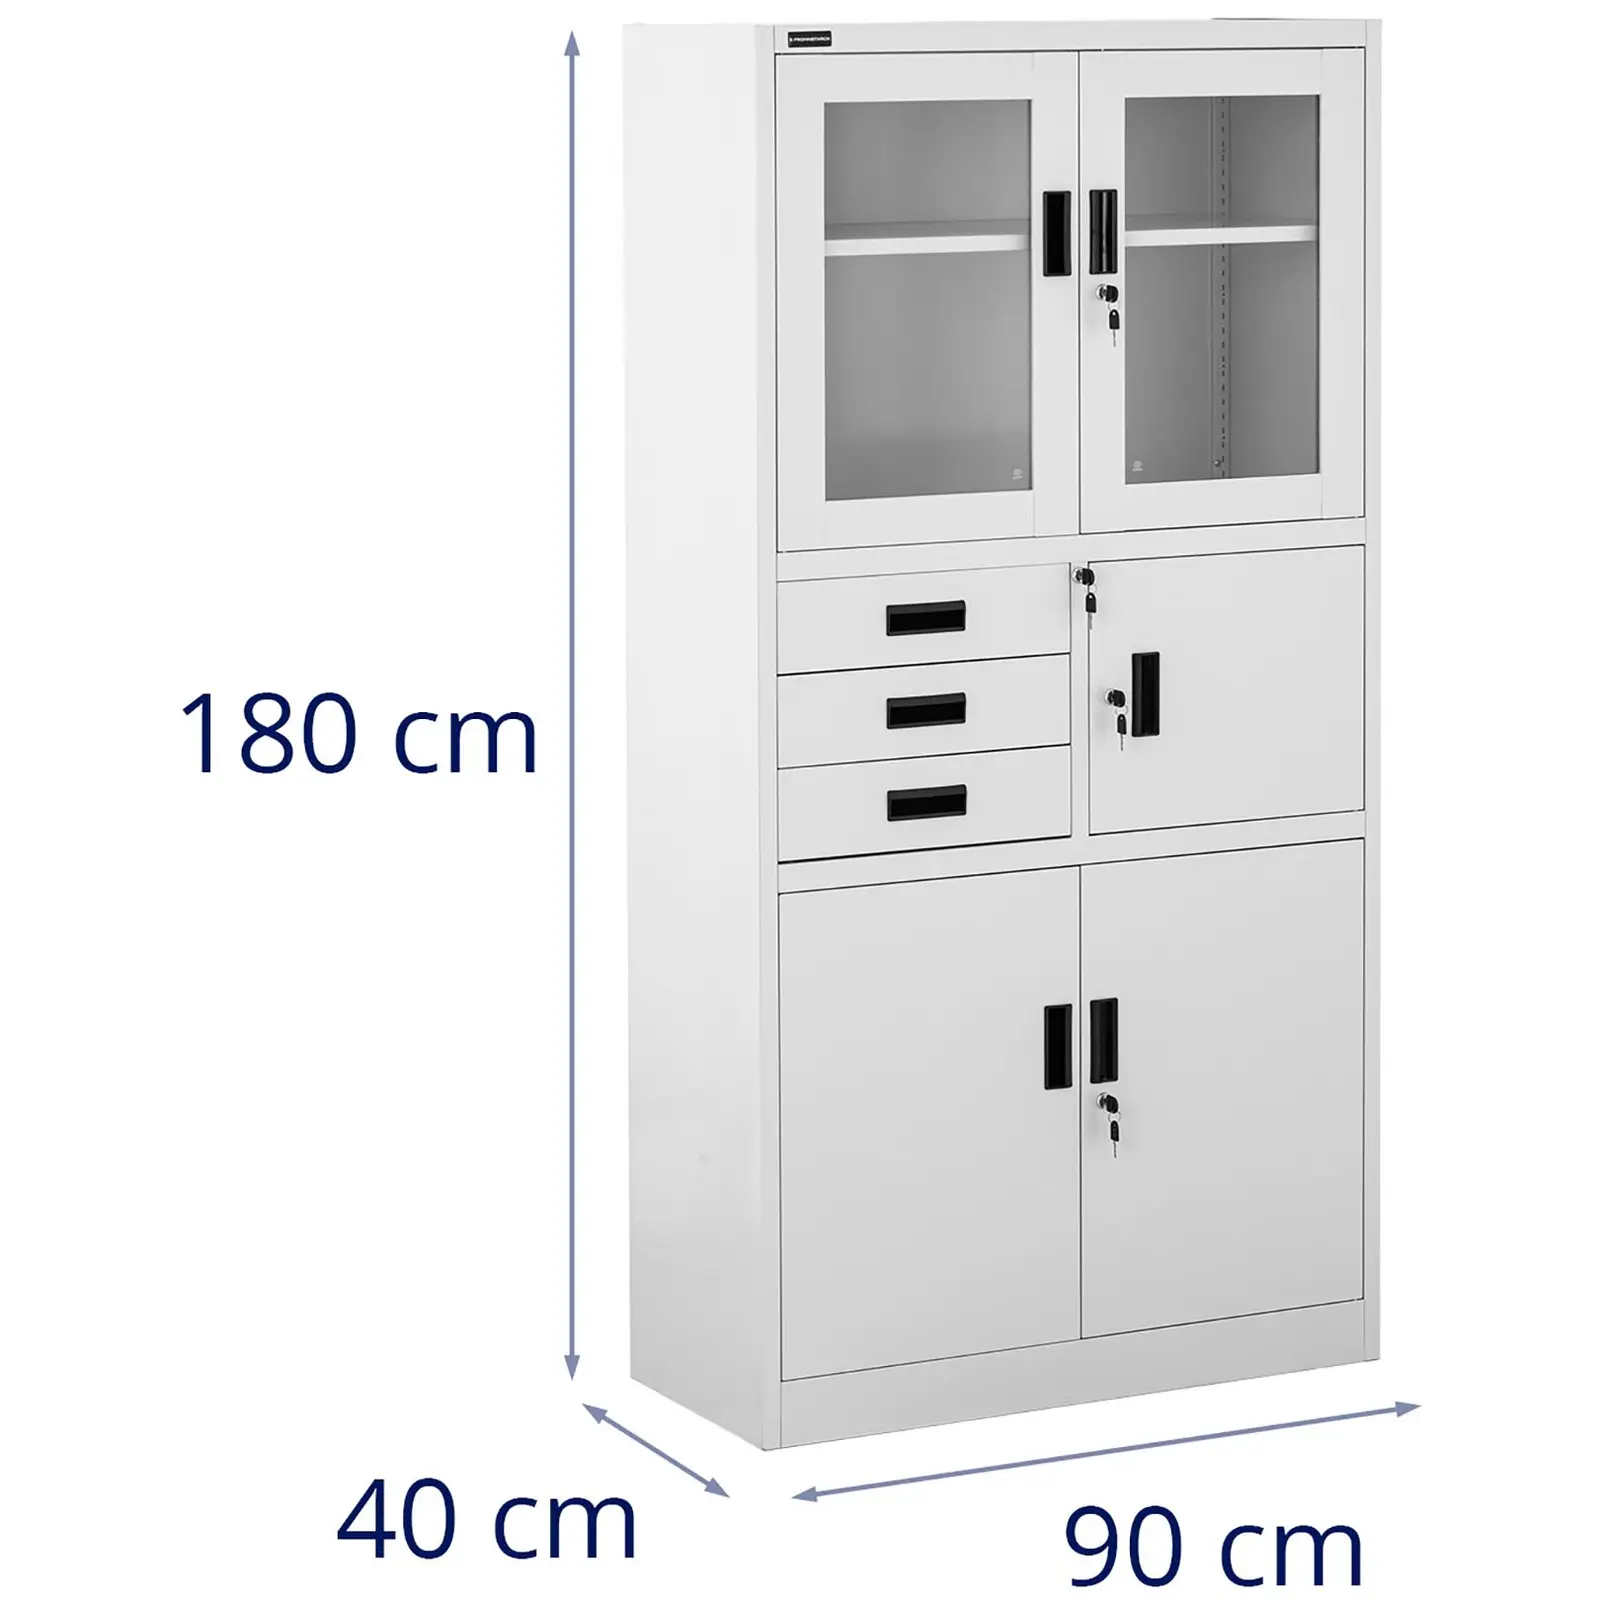 Filing Cabinet - 90 x 40 x 180 cm - 3 drawers - safe